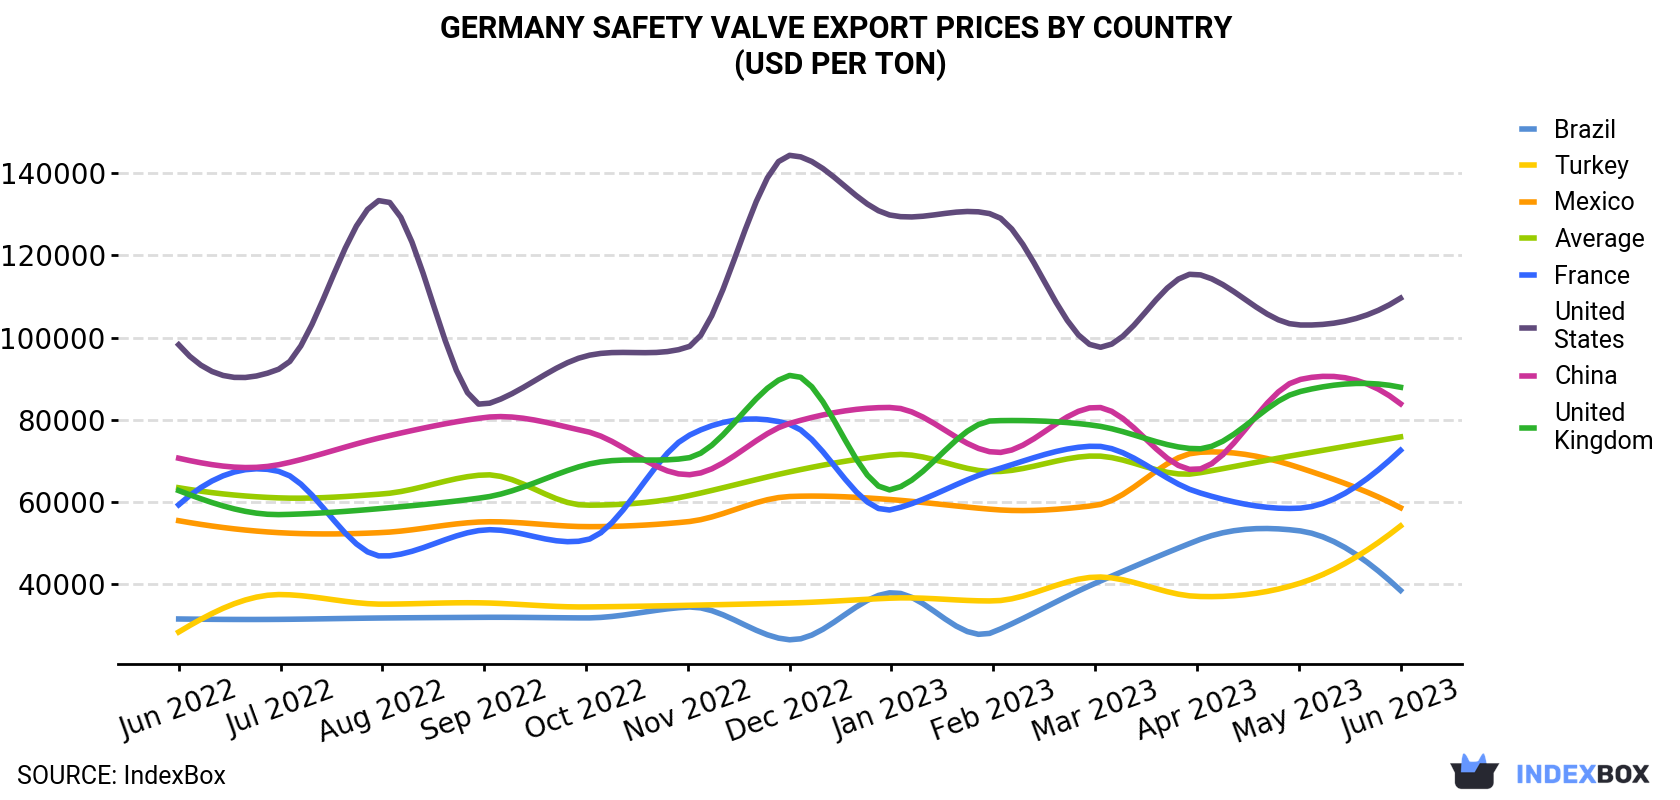 Germany Safety Valve Export Prices By Country (USD Per Ton)